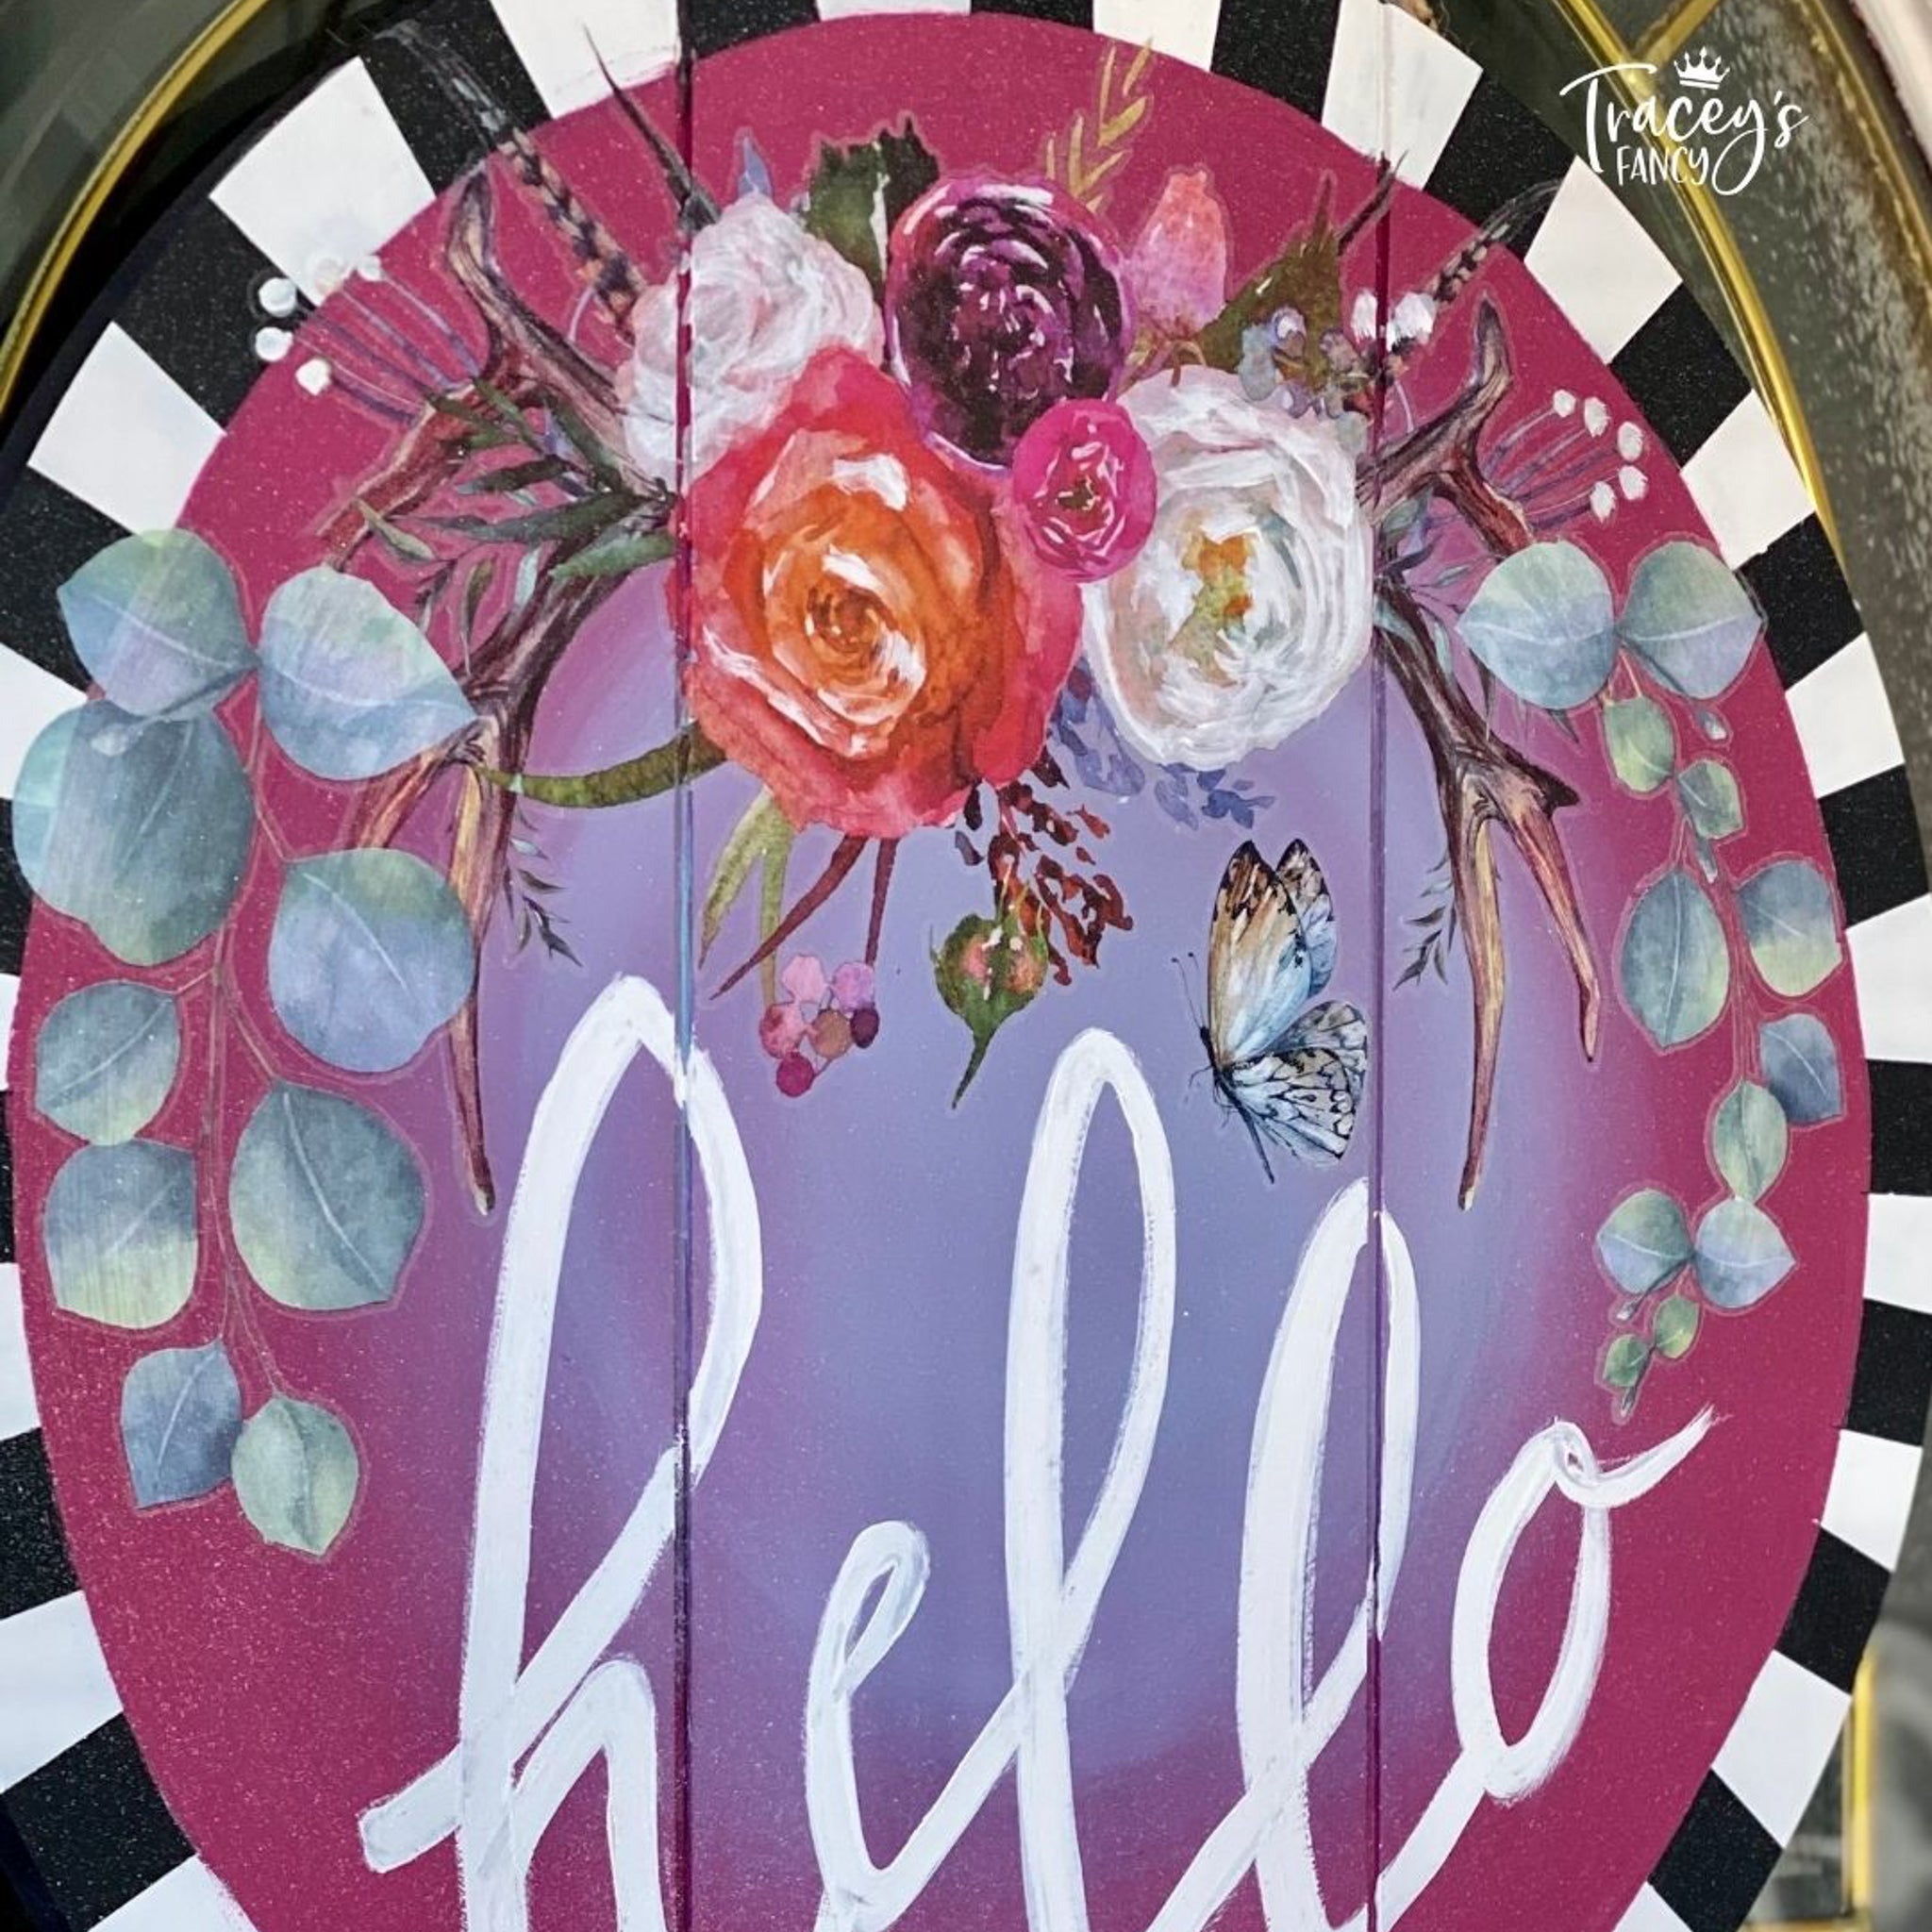 A wood oval craft created by Tracey's Fancy is painted in pink and lavender with Hello painted in white cursive has a black and white checker border and features some of the Flower Child transfer.